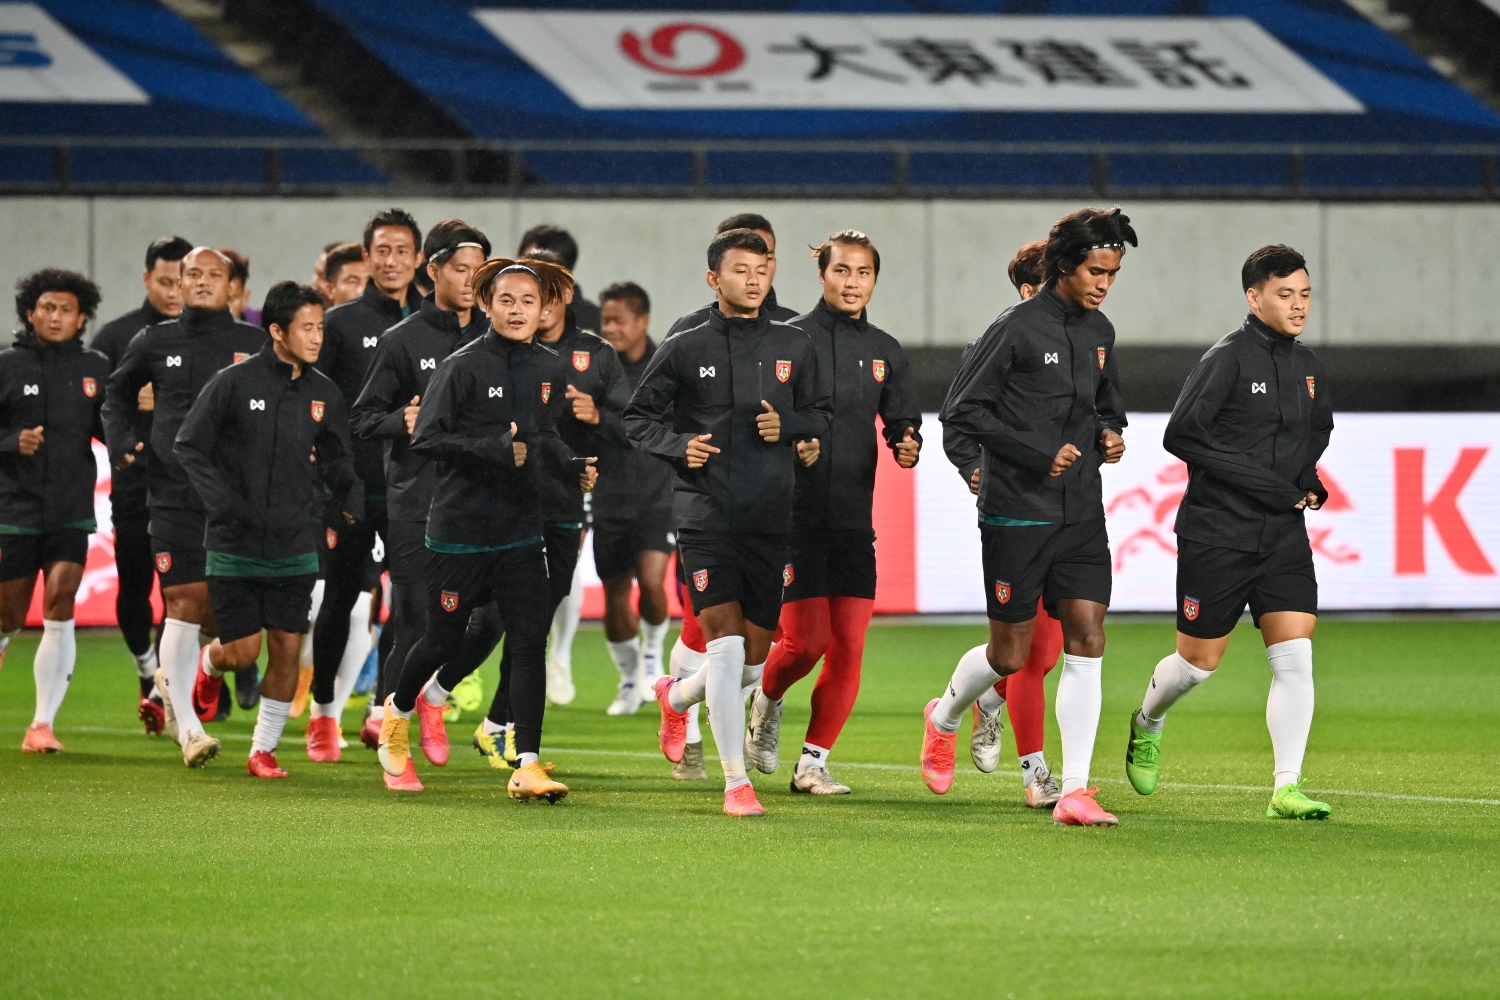 Members of Myanmar's national team take part in a training session ahead of their match against Japan, at Fuku-ari stadium in the Japanese city of Chiba on May 27. (AFP)